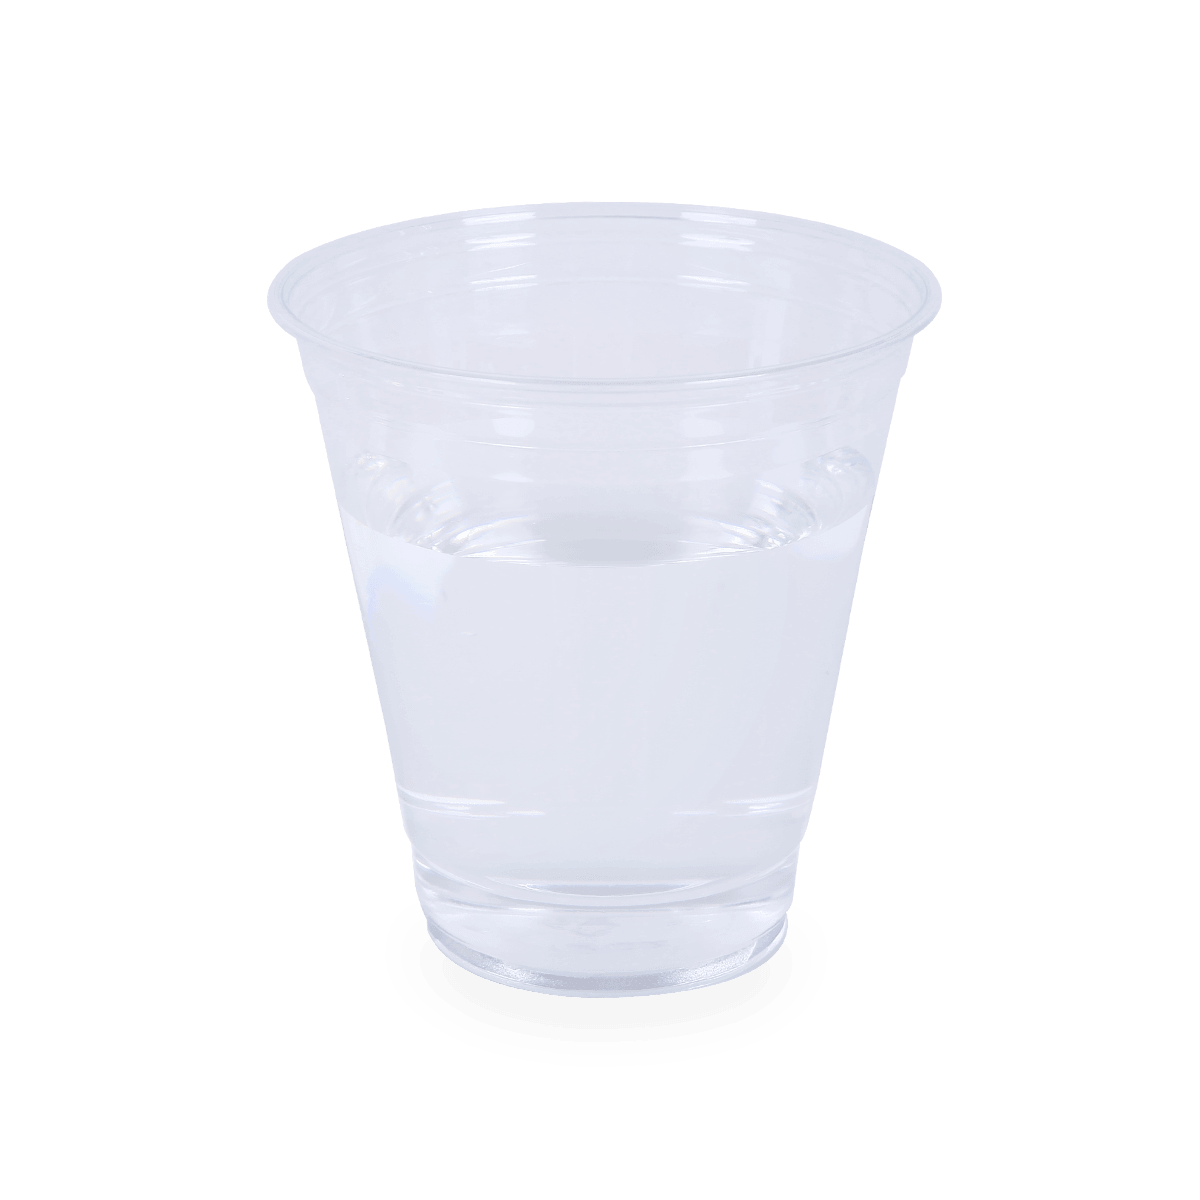 PP plastic cups and lids